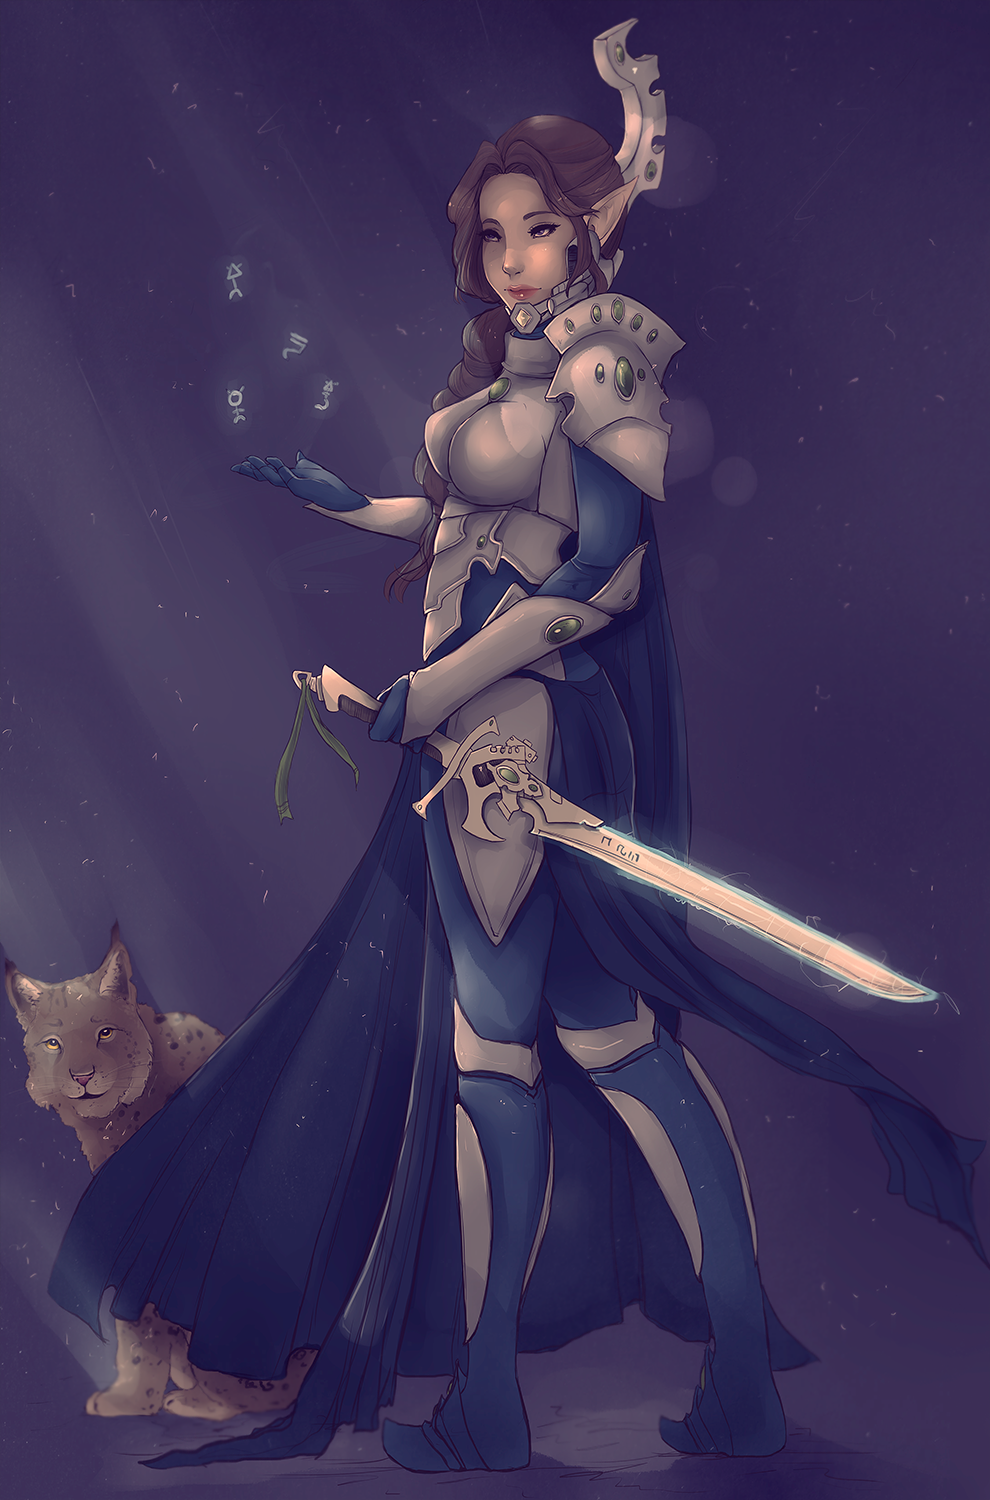 warhammer_40k_eldar commission by_ipheli-d8vq7h5.png.